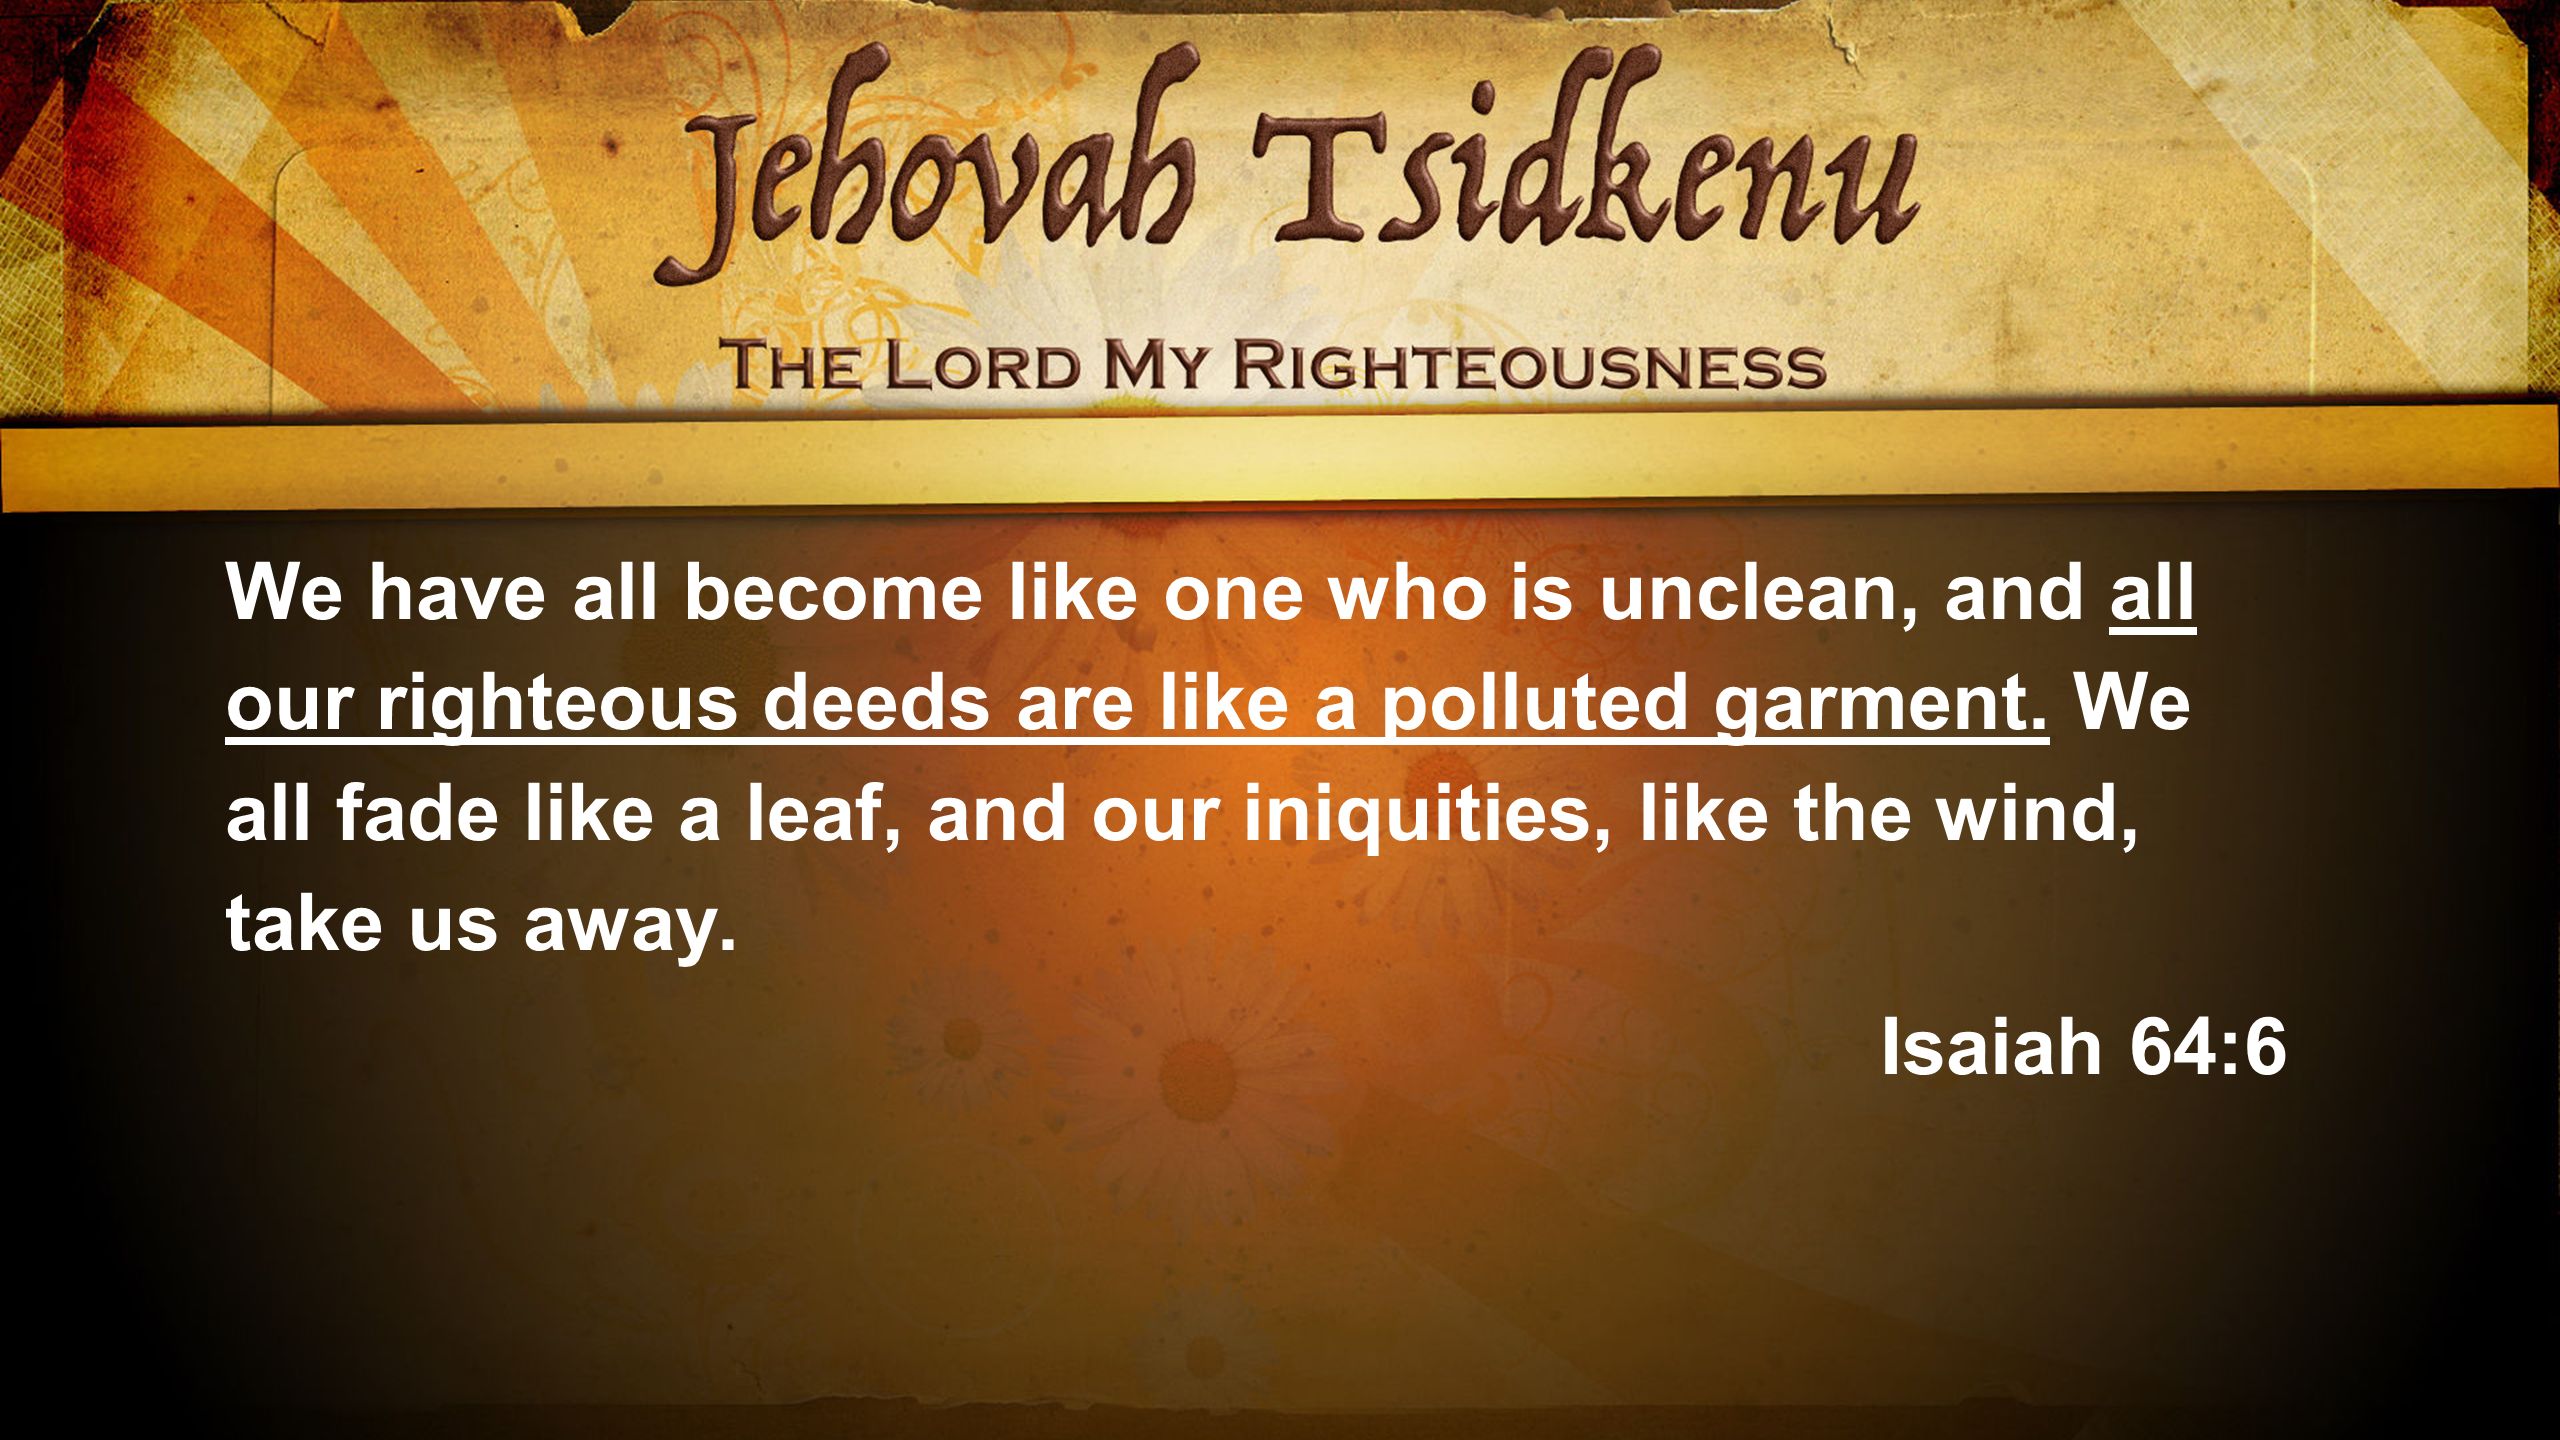 We have all become like one who is unclean, and all our righteous deeds are like a polluted garment.